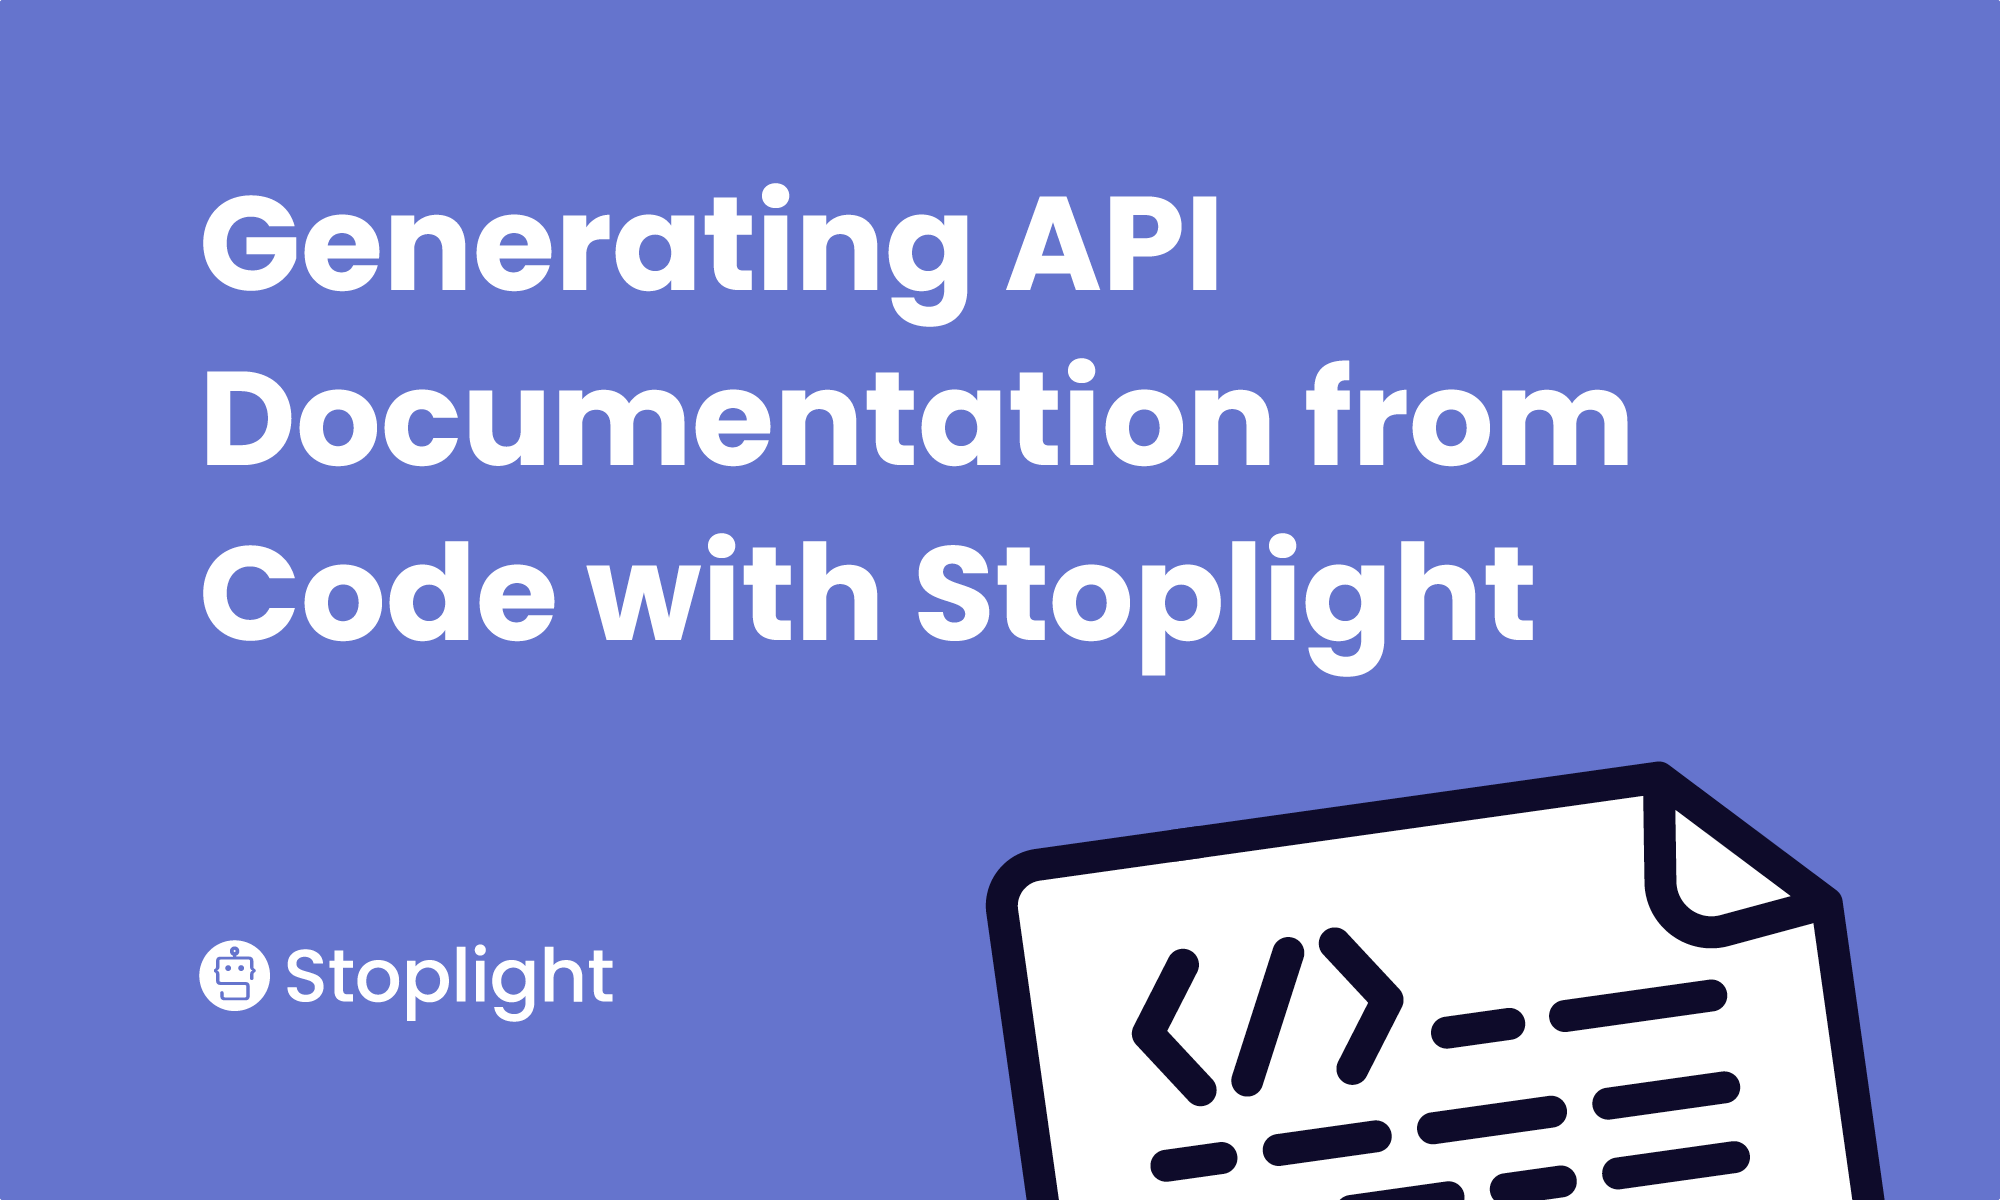 Generating API Documentation from Code with Stoplight